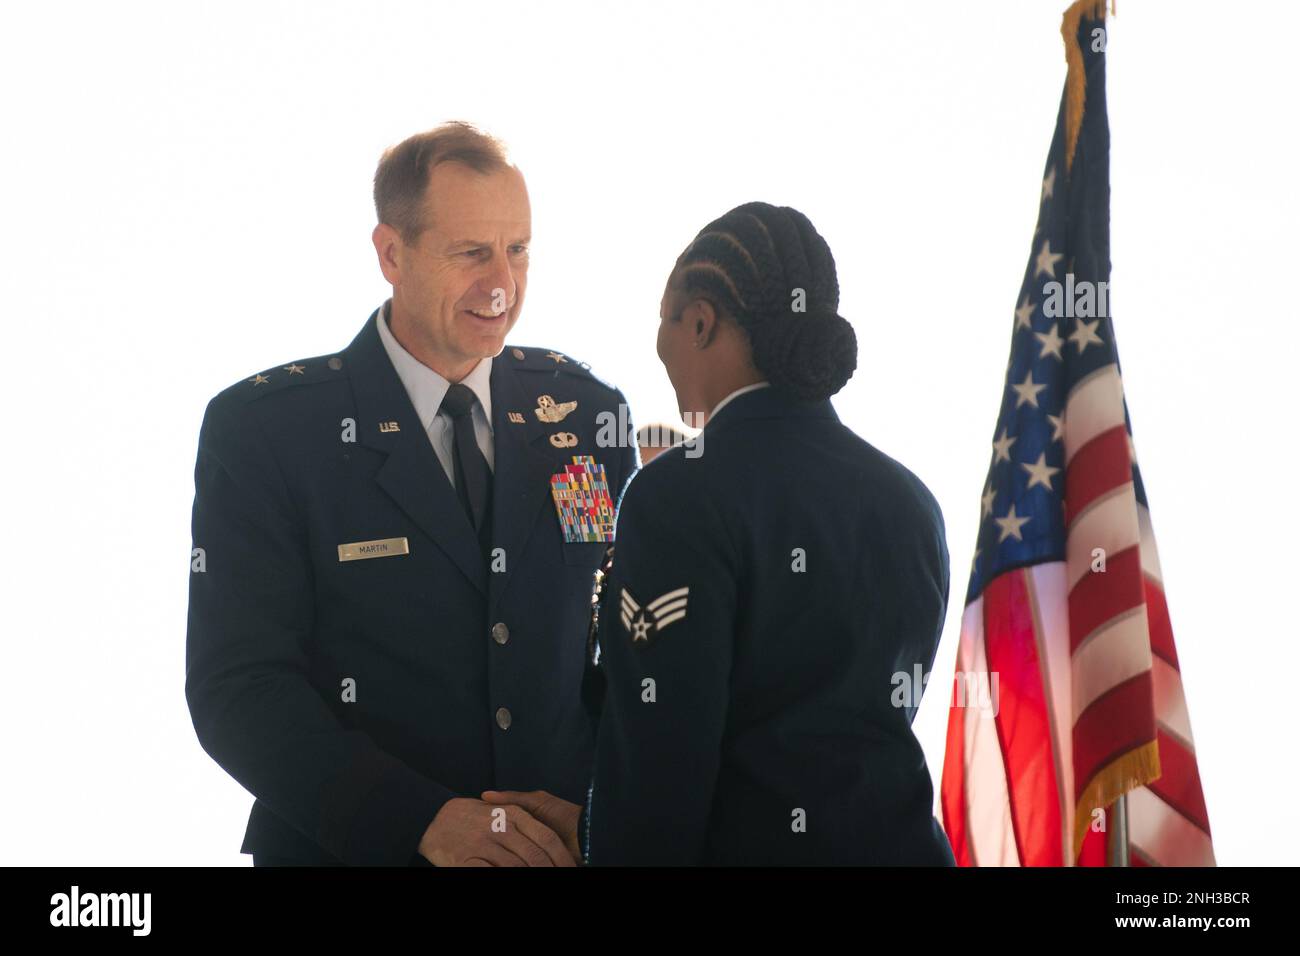 U.S. Air Force Maj. Gen. Corey Martin, left, 18th Air Force commander, presents Senior Airman Deniece Lobban, loadmaster with MOOSE 98, with the Distinguished Flying Cross during a ceremony at Travis Air Force Base, California, Dec. 9, 2022. Martin recognized 24 Airmen for their heroic actions during Operation Allies Refuge. The Distinguished Flying Cross is awarded to any officer or enlisted person of the U.S. armed forces for heroism or extraordinary achievement while participating in aerial flight. Stock Photo